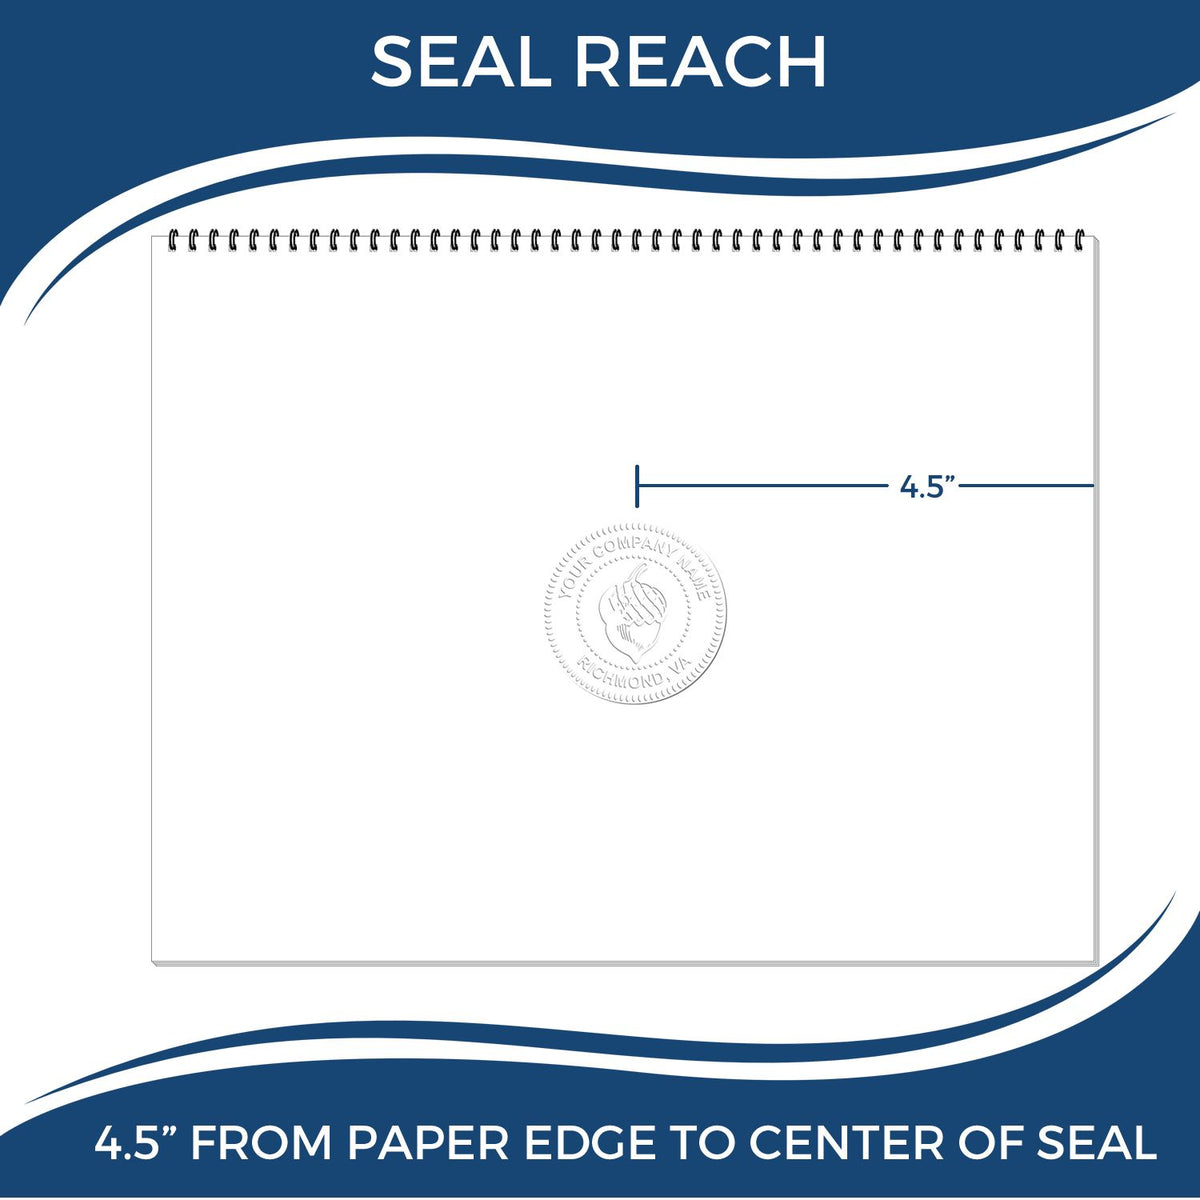 An infographic showing the seal reach which is represented by a ruler and a miniature seal image of the State of Guam Extended Long Reach Engineer Seal